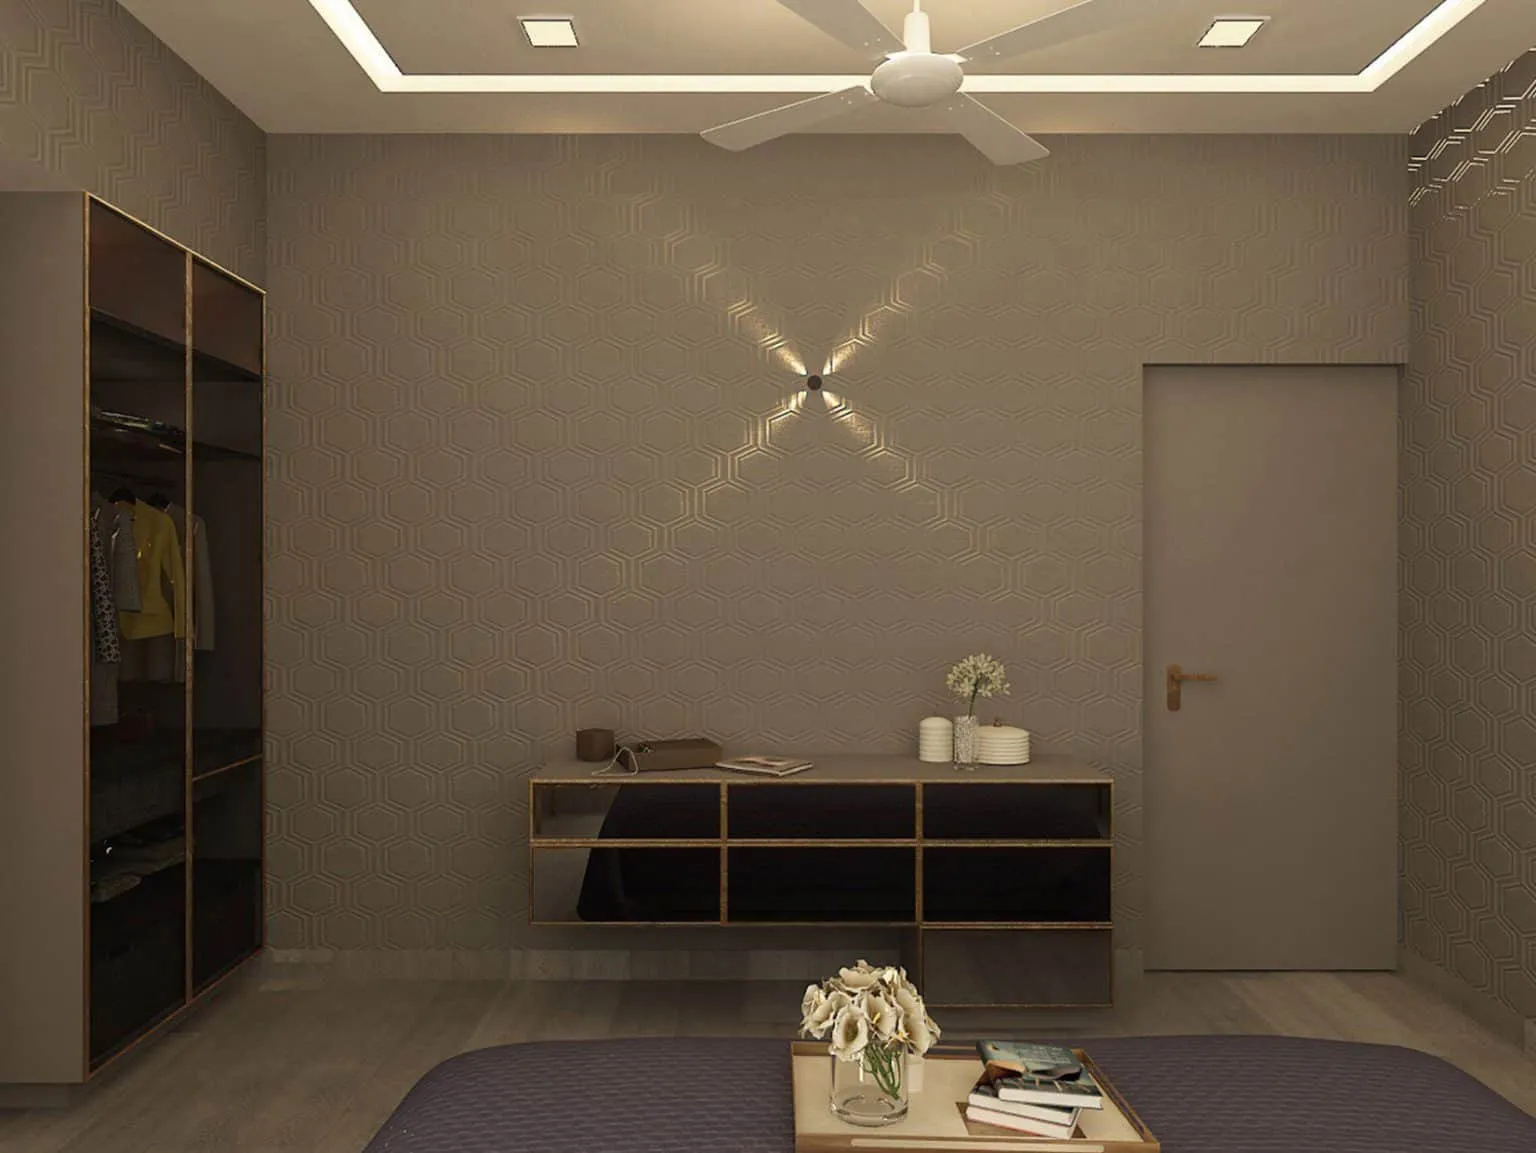 The best & top home interior designers in Bangalore, have great profile with exceptional work